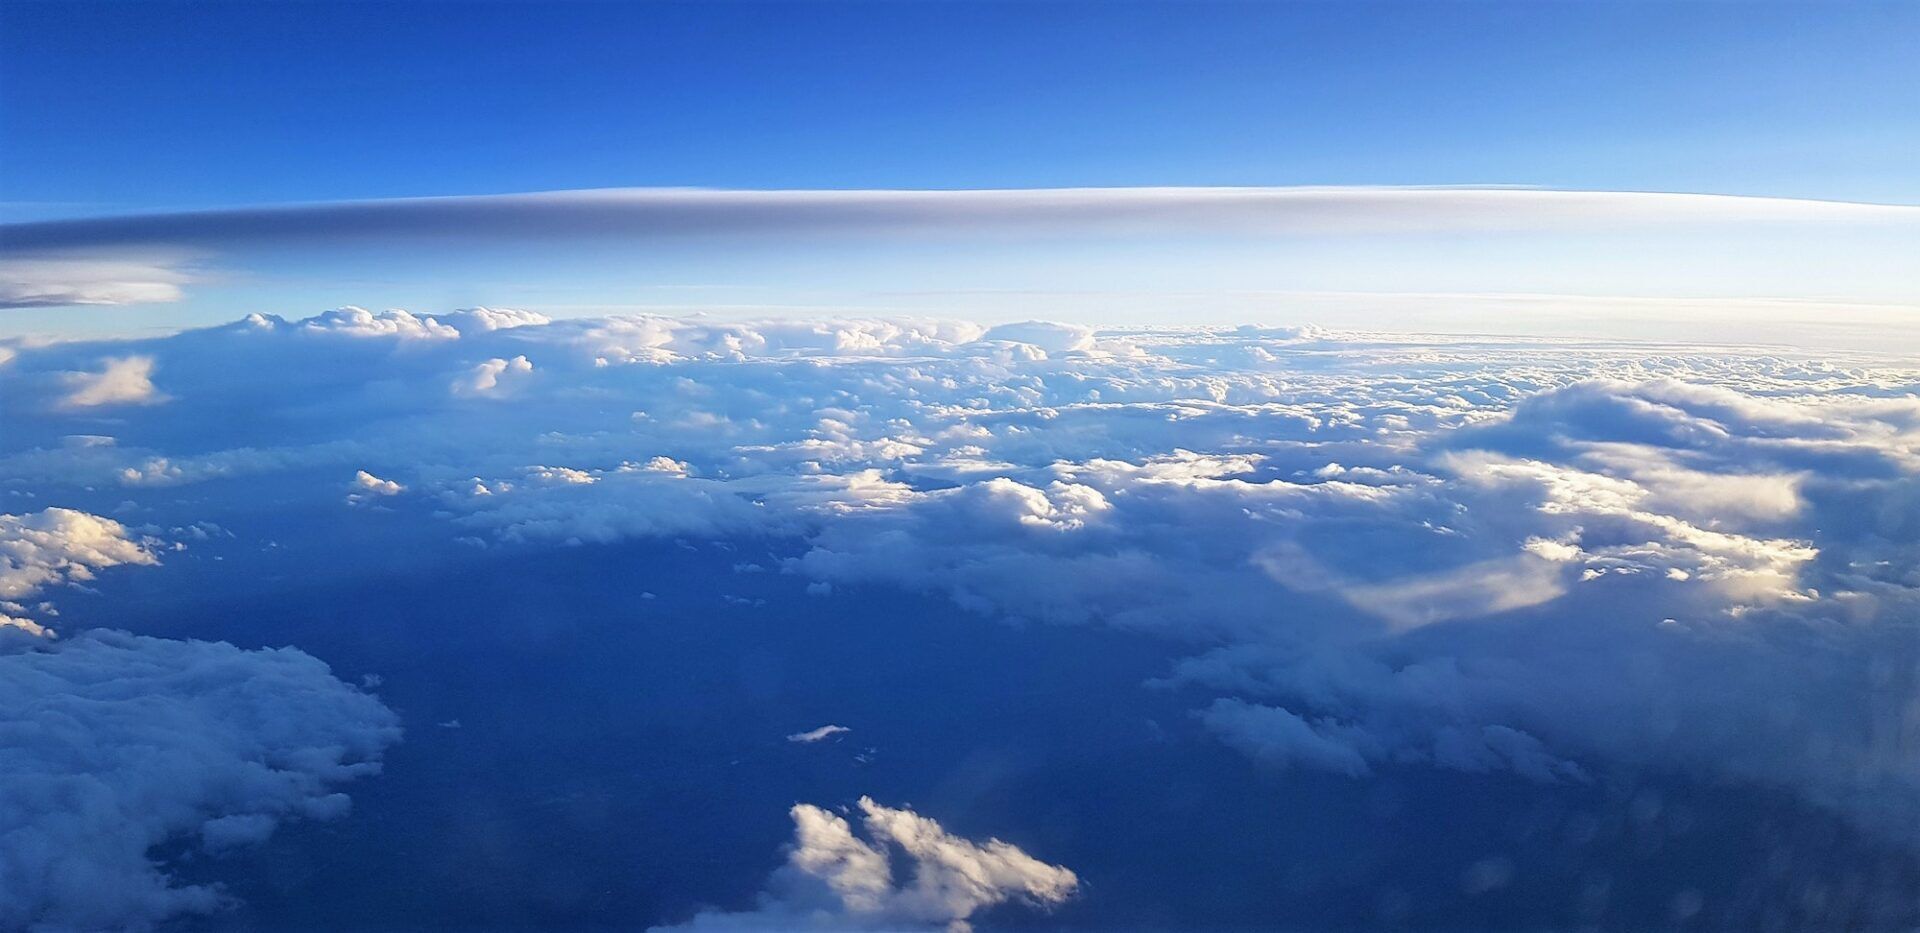 Beautiful scenery of the earth and white clouds seen from a plane